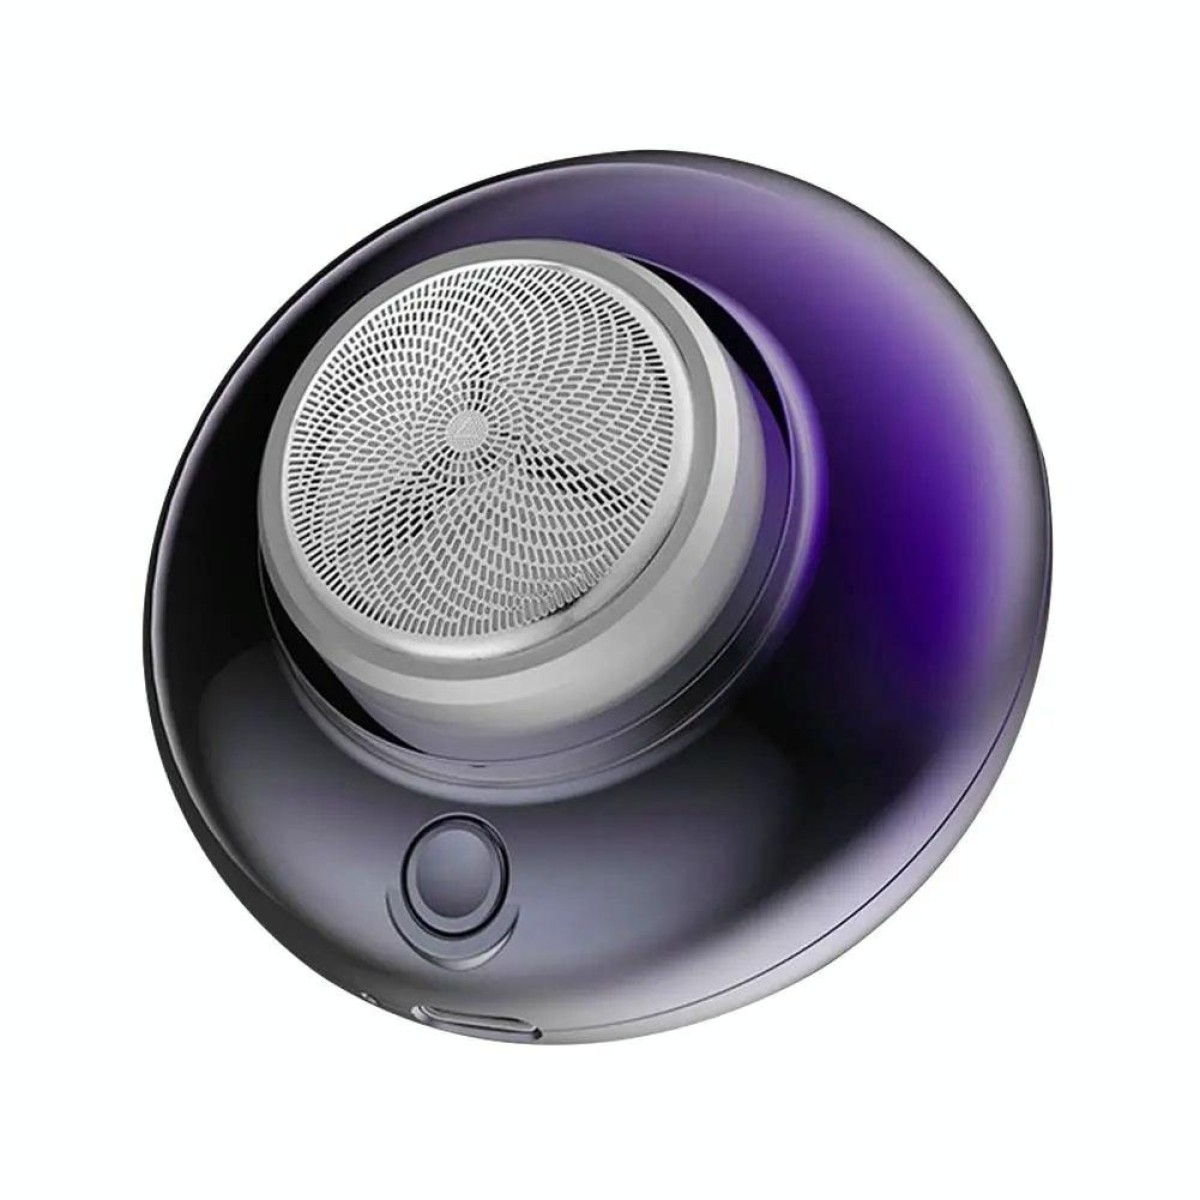 C21 Mini Flying Saucer Shaped Electric Shaver Travel Portable Charging Beard Trimmer(Purple)